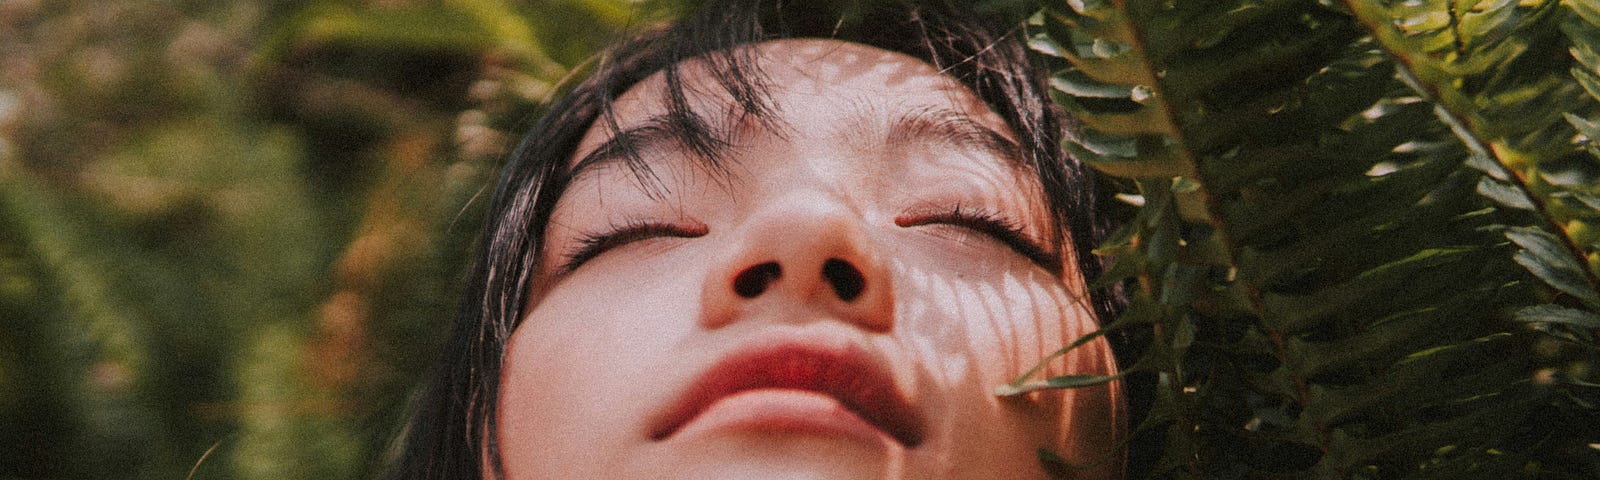 close up of a girl and her eyes closed embracing mother nature around her